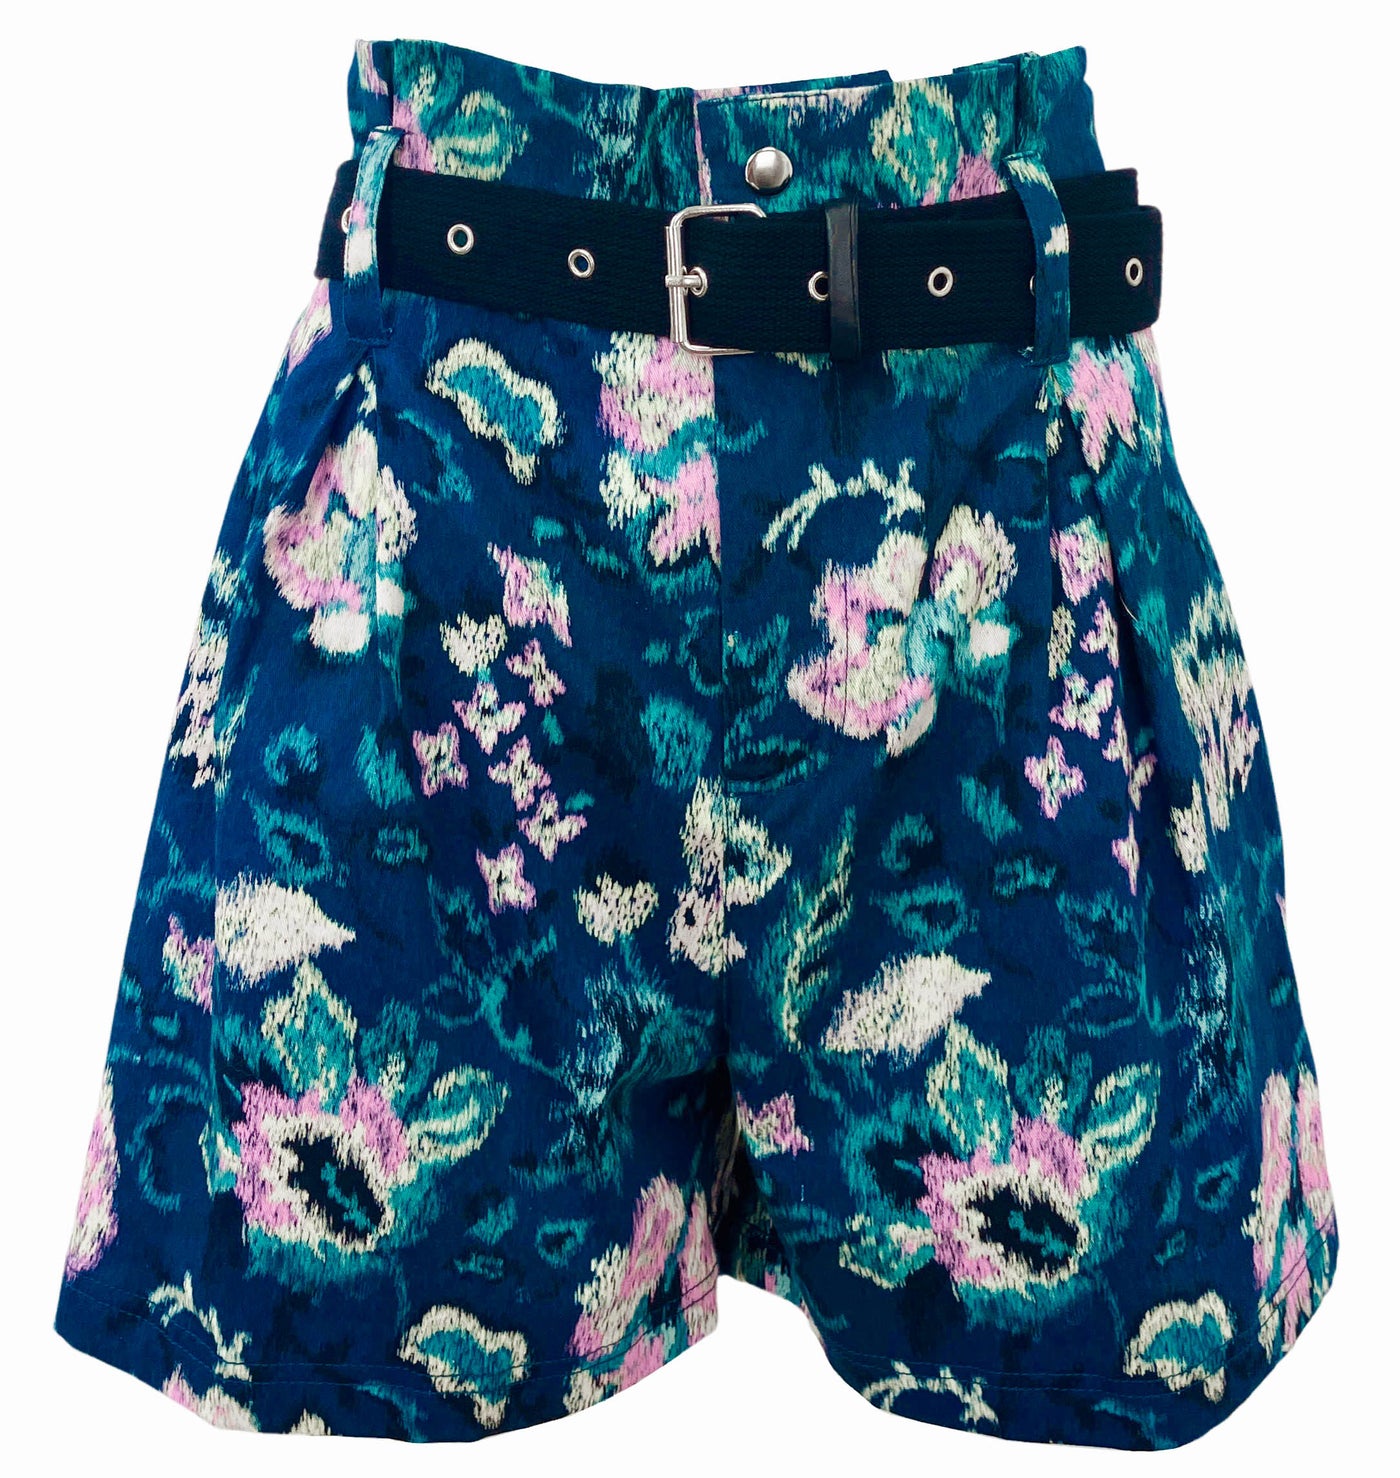 Maria Cher Matato Amal Shorts in Mix - Discounts on Maria Cher at UAL